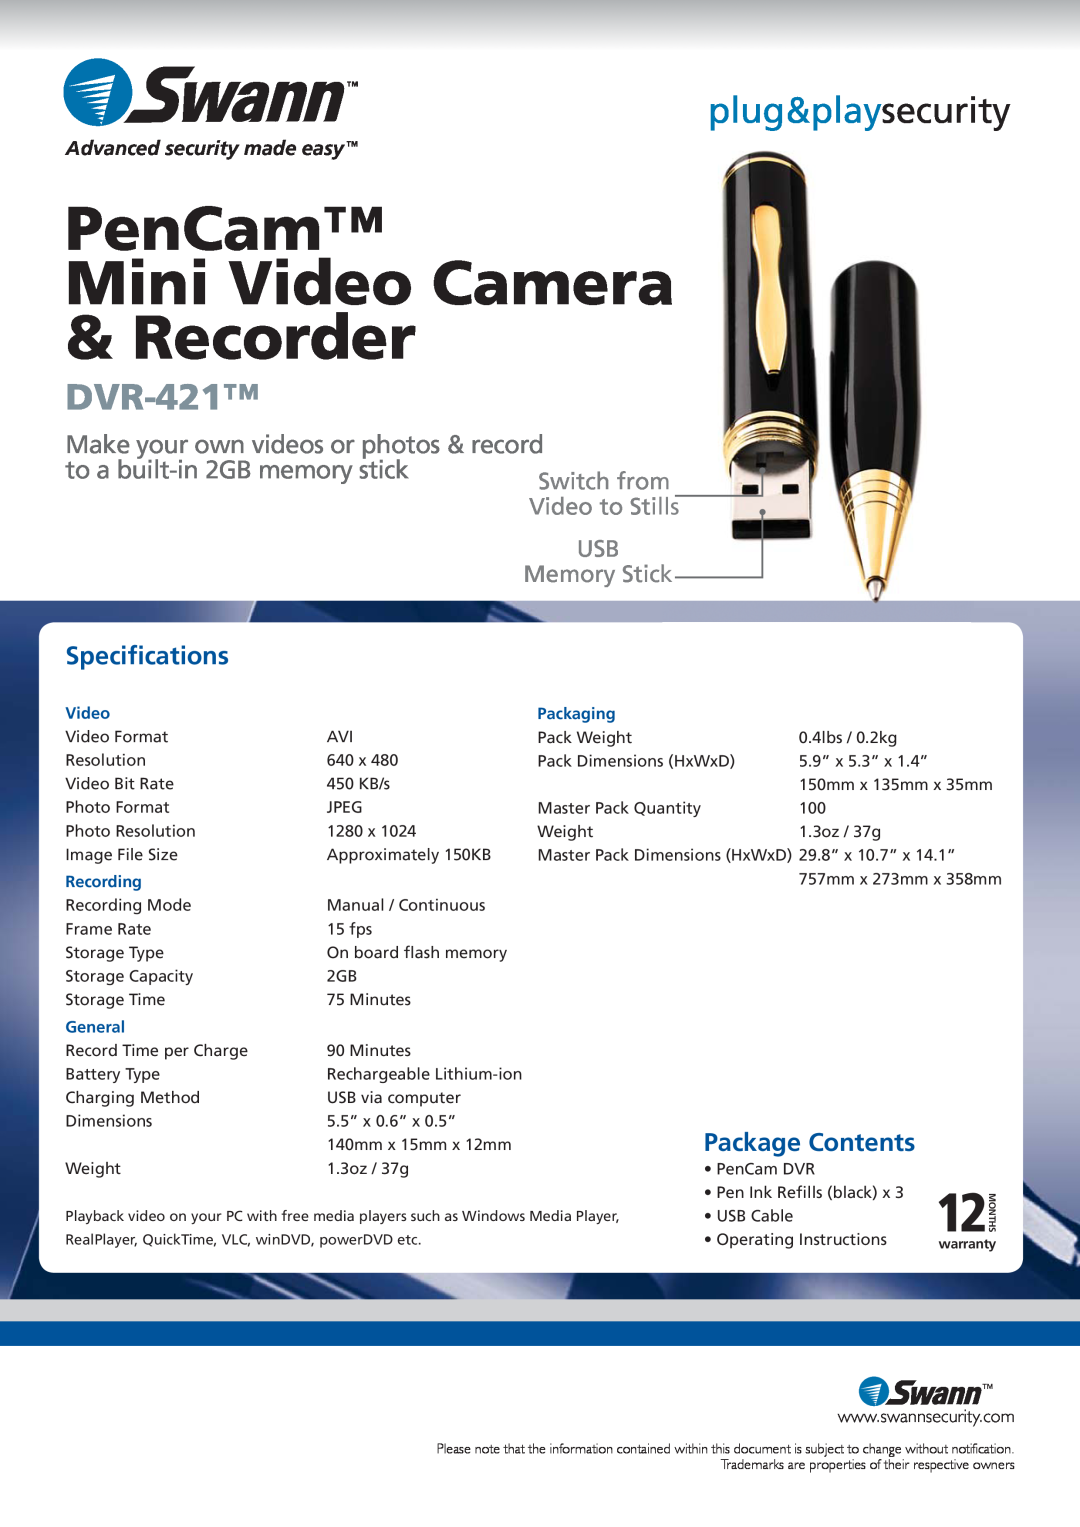 Swann DVR-421TM Make your own videos or photos & record, to a built-in 2GB memory stick, PenCam Mini Video Camera Recorder 